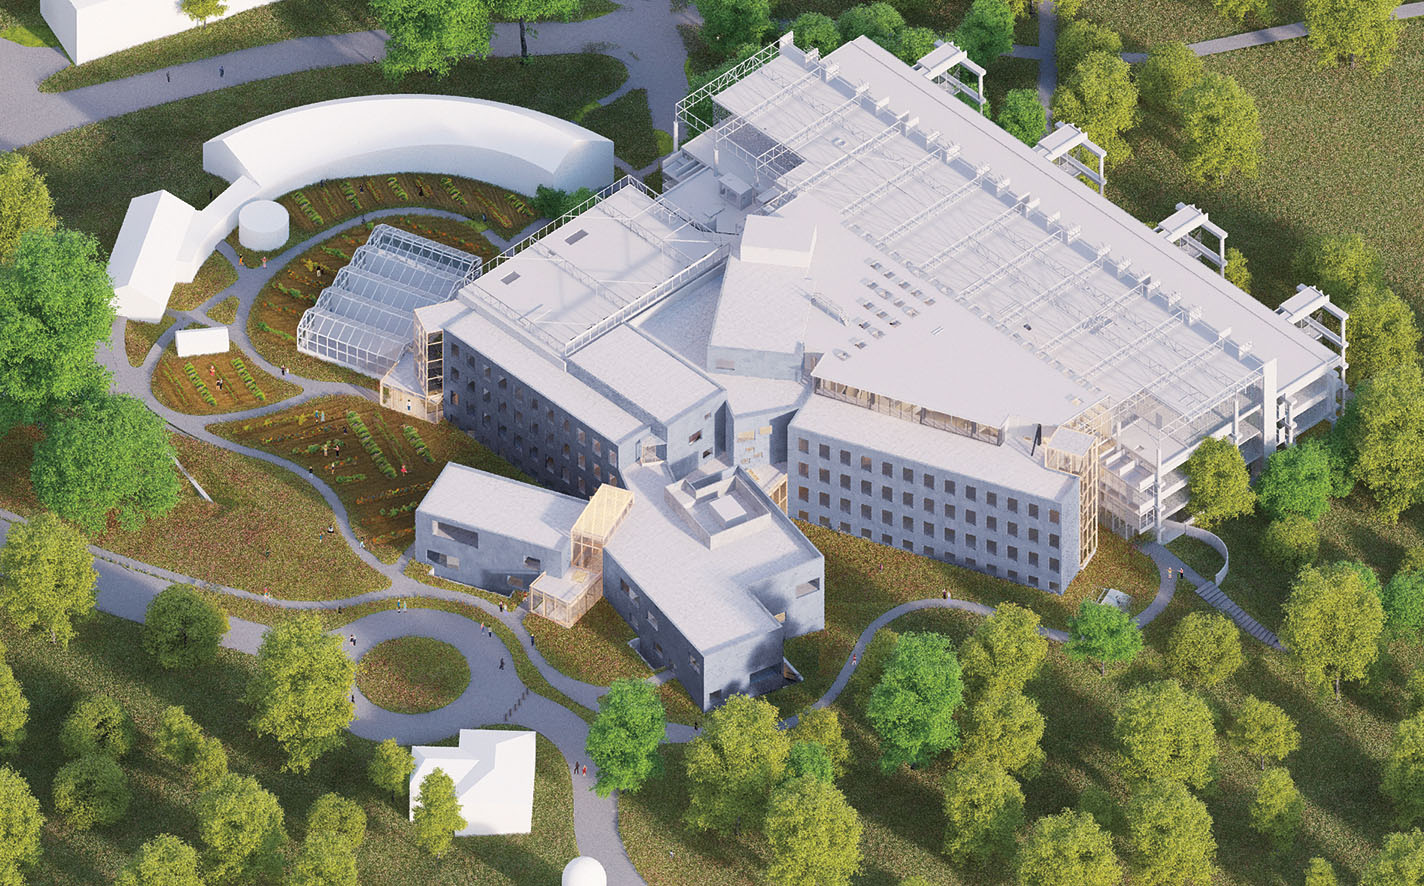 Science Hill as it will look after the completion of the complex of new buildings in late 2021.